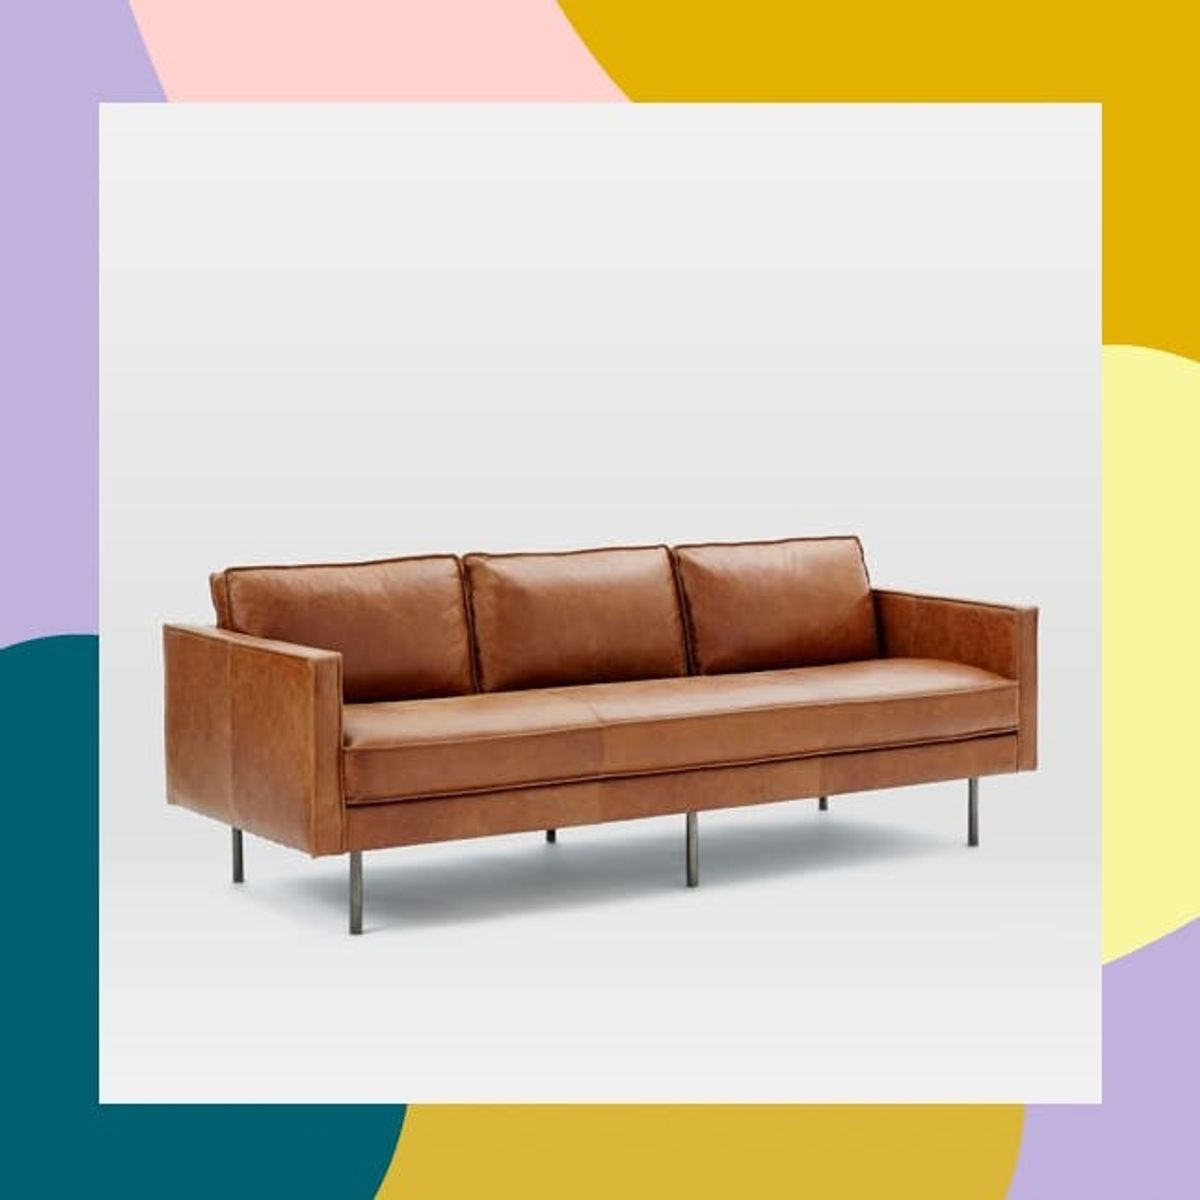 Every Plush and Affordable Sofa We’re Coveting From West Elm’s Holiday Seating Sale